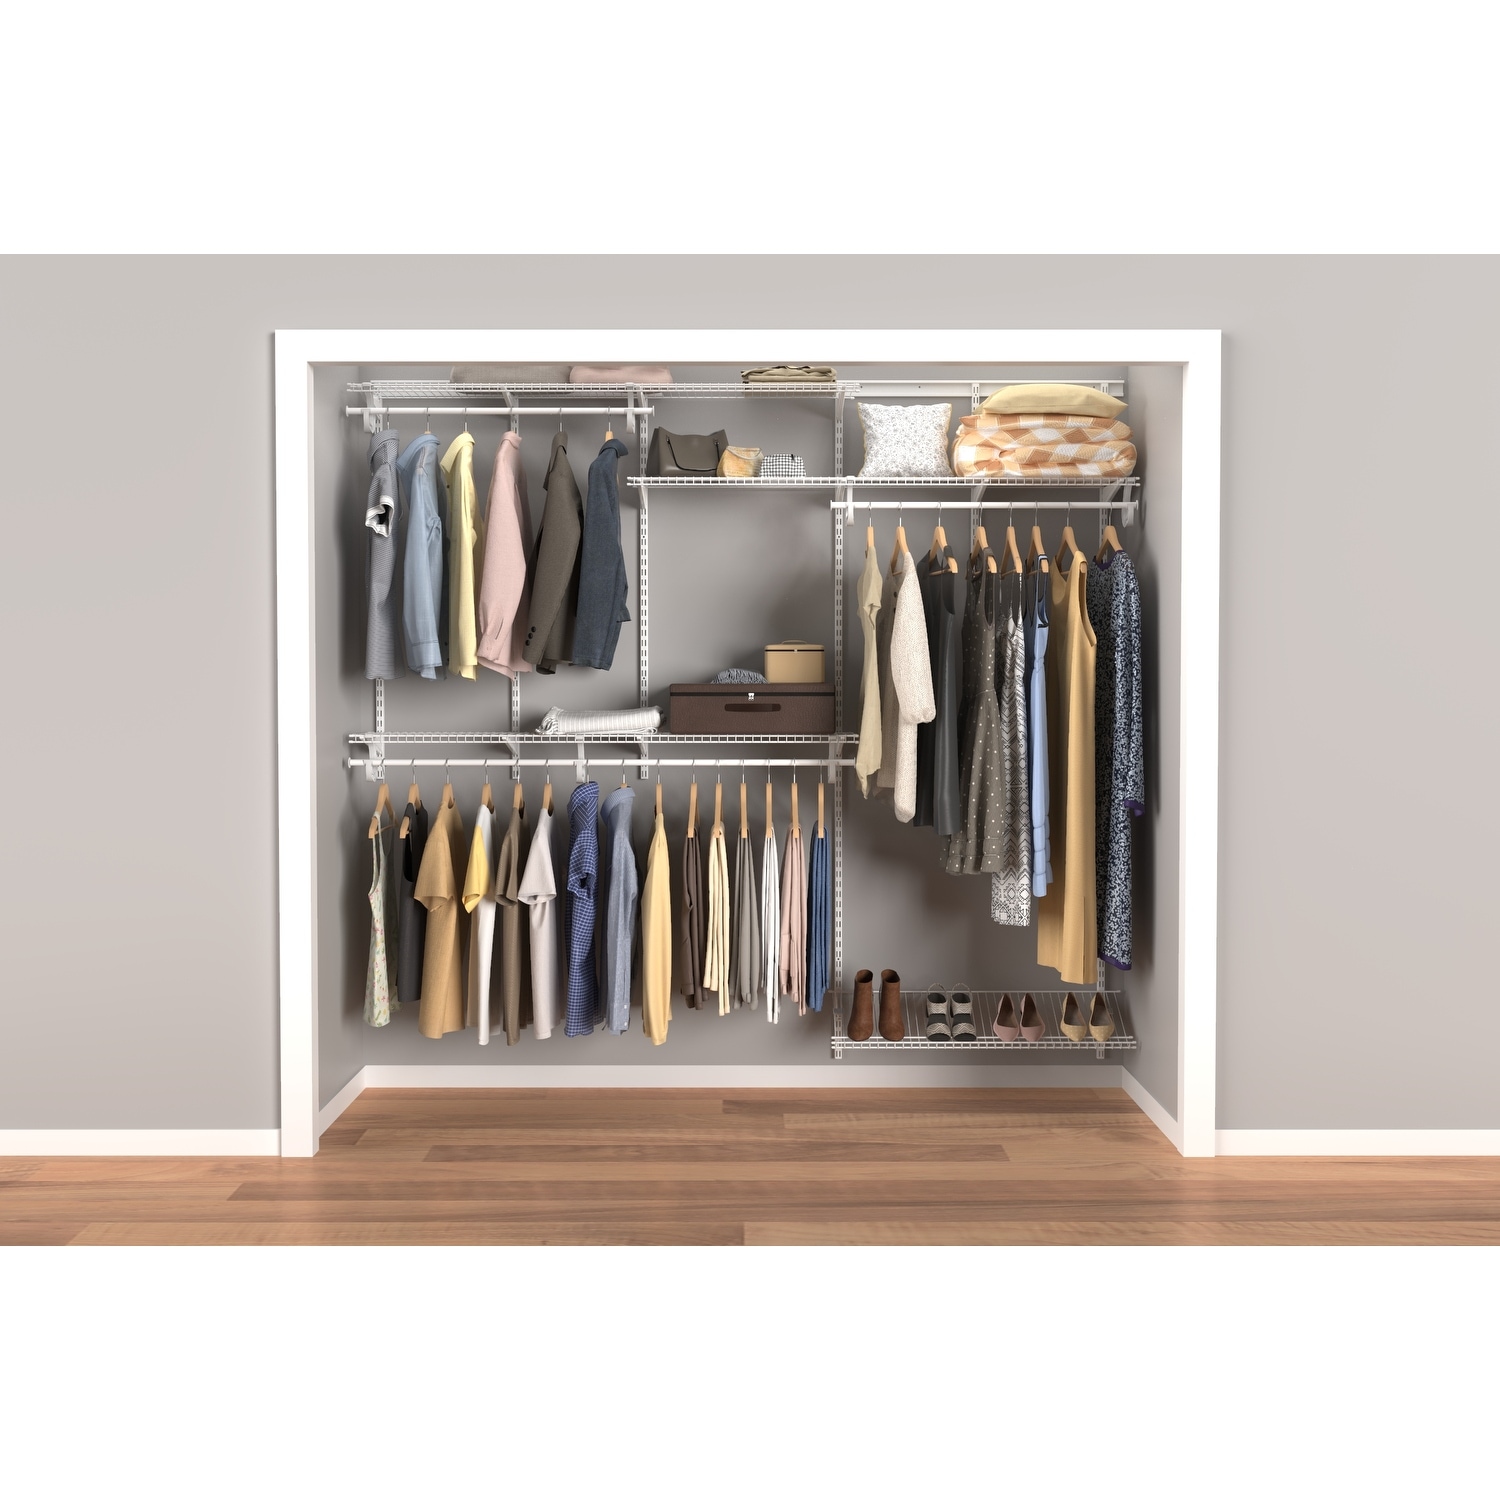 ClosetMaid ShelfTrack 5 ft. to 8 ft. 12 in. D x 96 in. W x 78 in